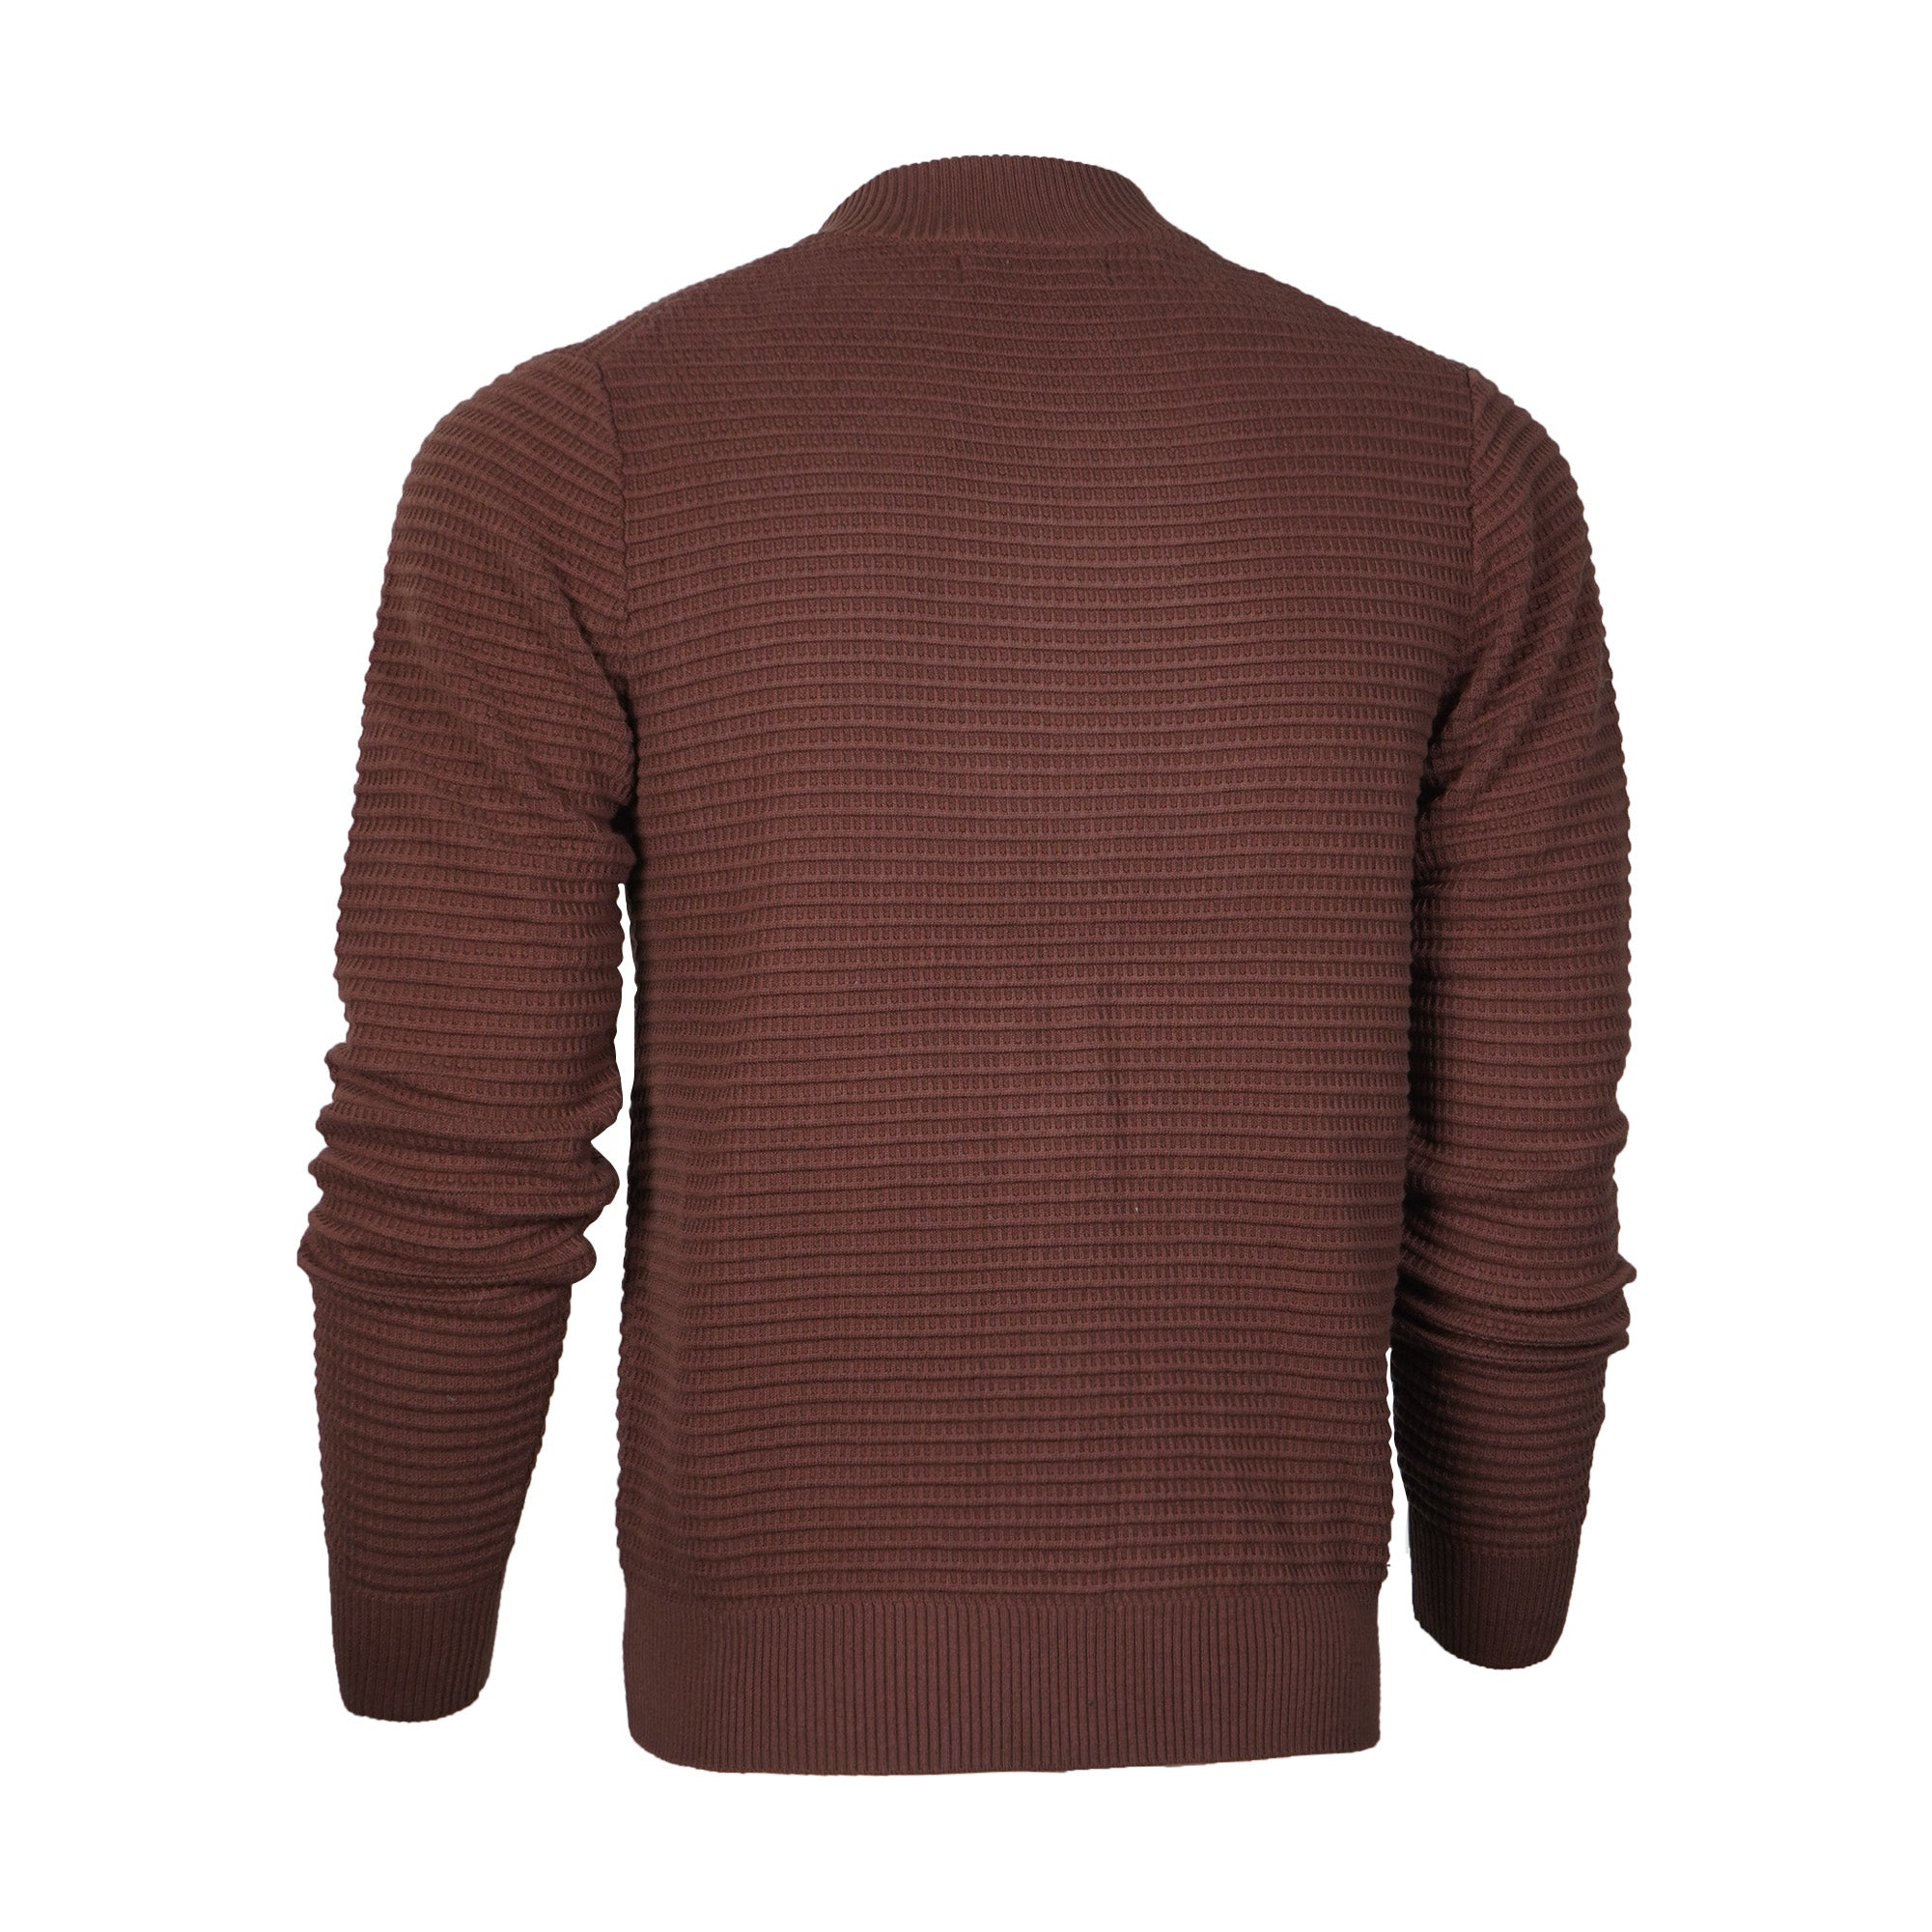 (Buy 1 20%/ Buy 2 40% off)Men's Tight Knitted Zip Up Cardigans